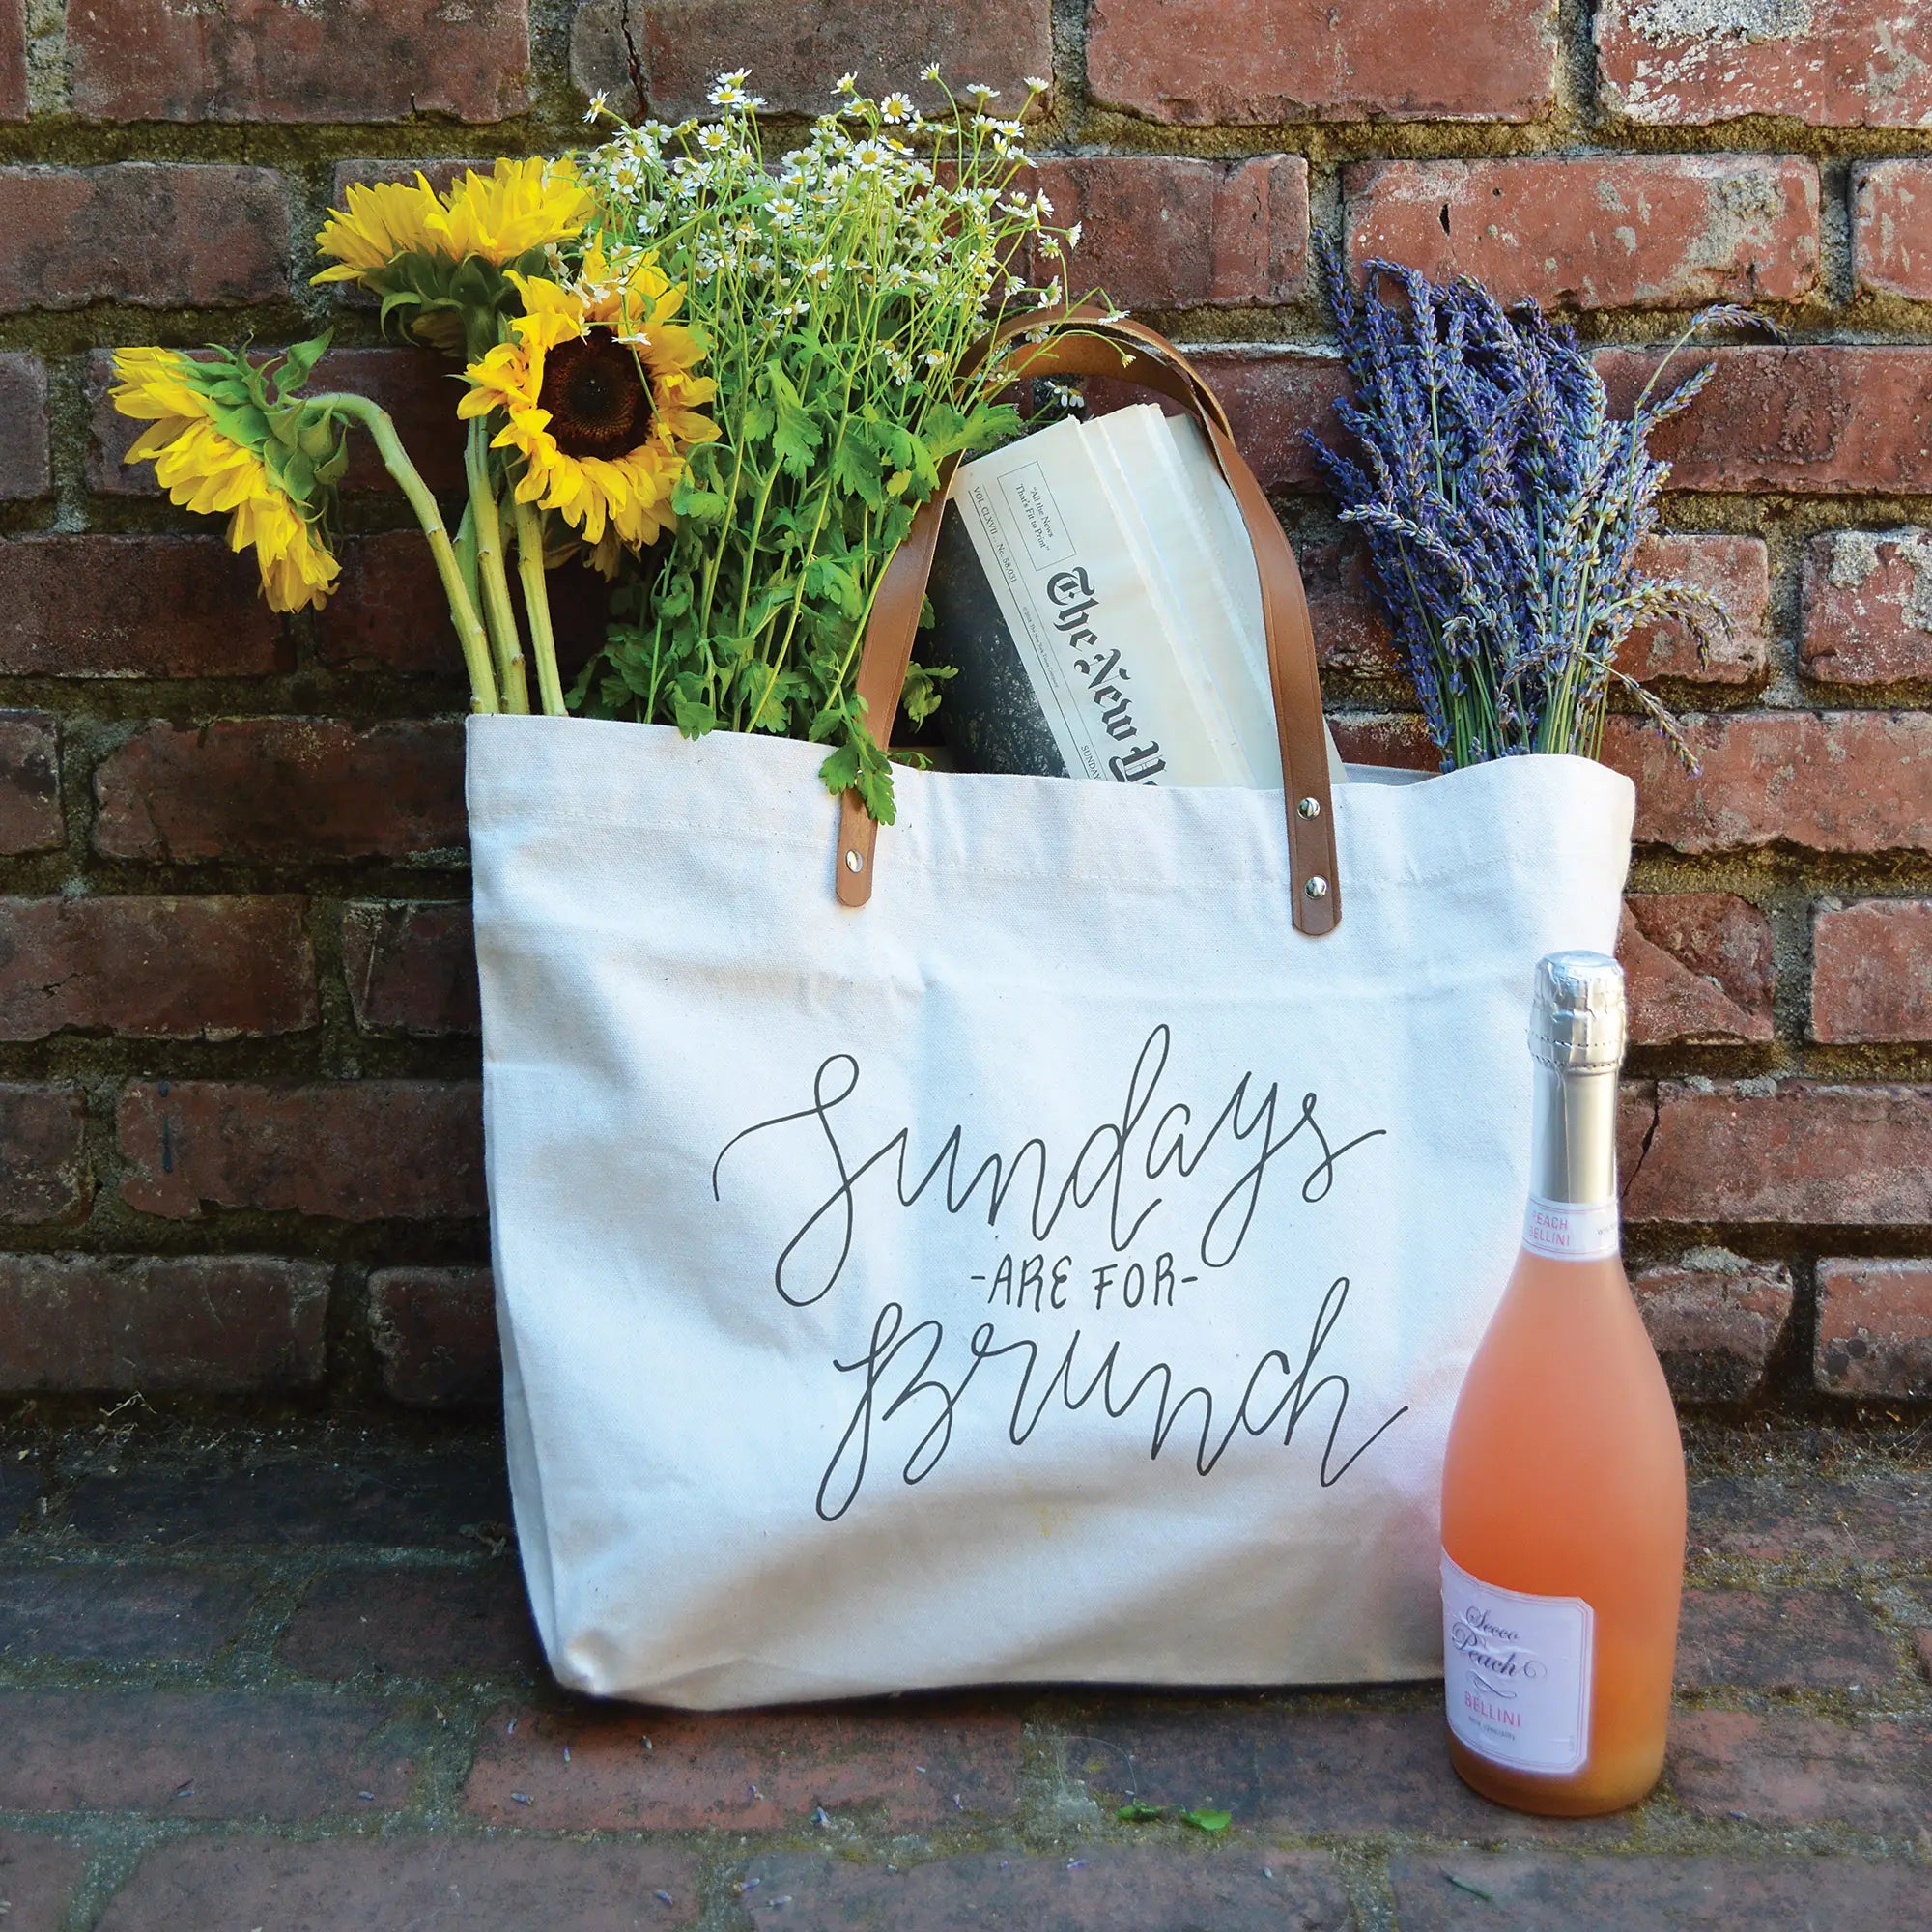 Tote bag with text "sundays are for brunch" against a brick wall. A bottle of sparkling wine is next to the bag and several bouquets of flowers are in the tote.